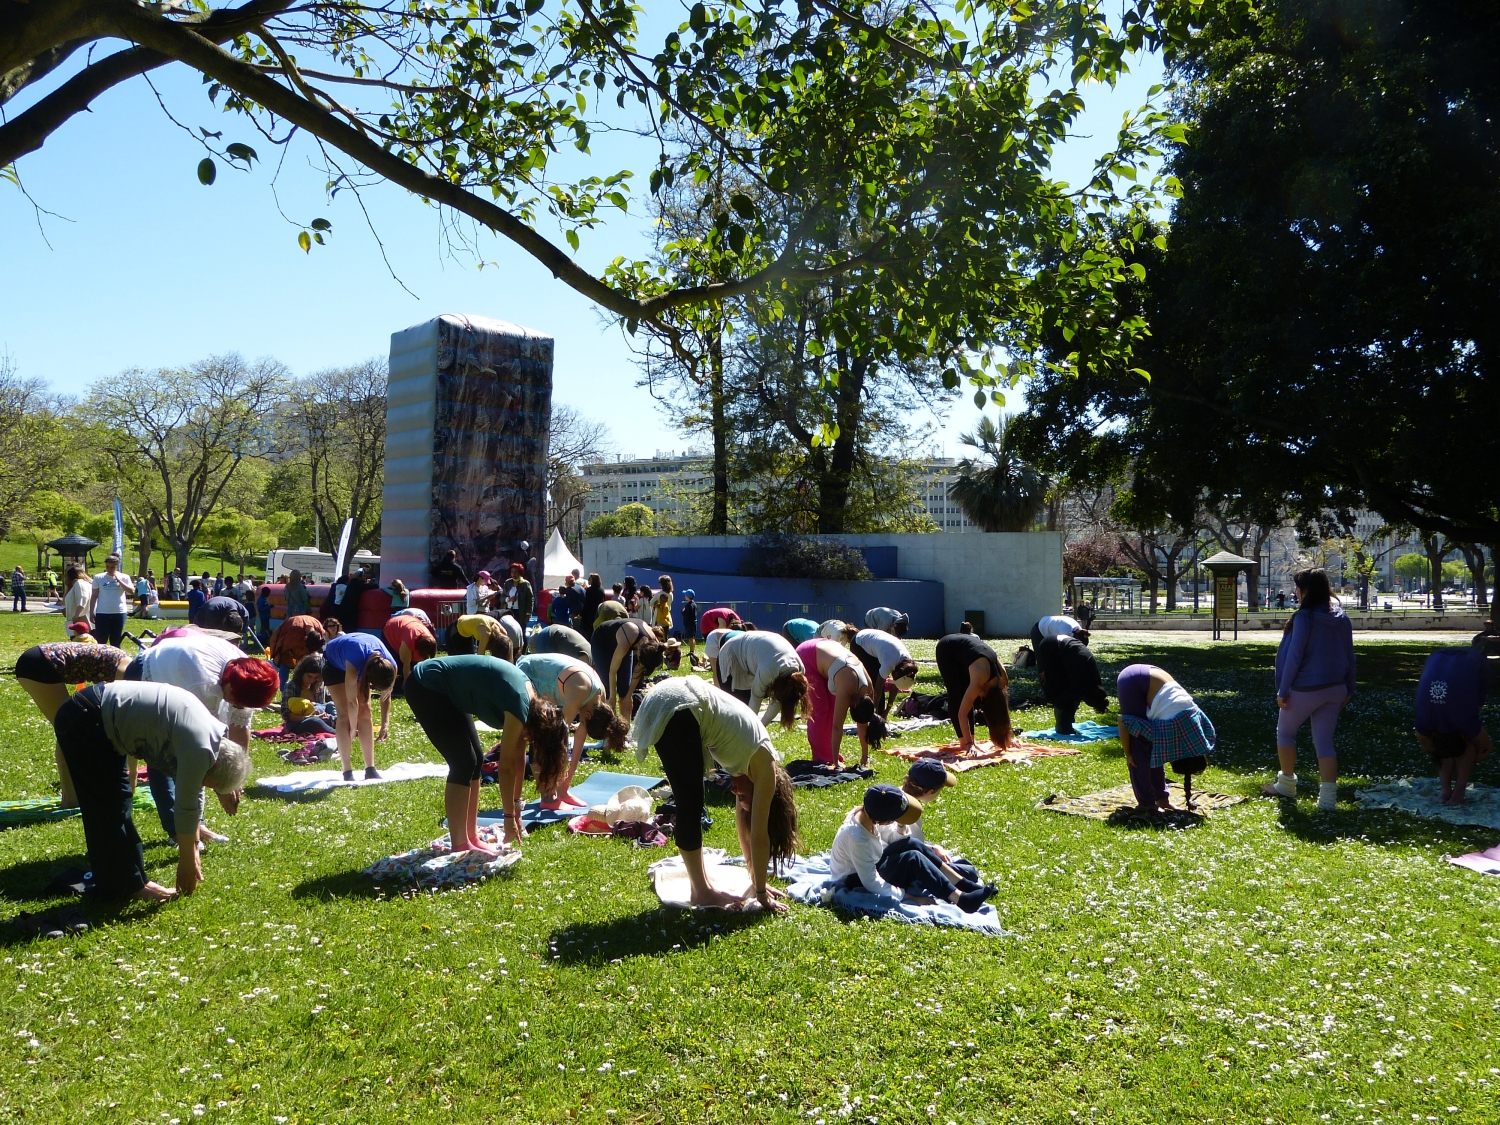 Yoga Sámkhya class at the event 'Há Festa no Parque' organized by the City Hall of Lisbon on the occasion of the commemorations of April the 25th - 2016